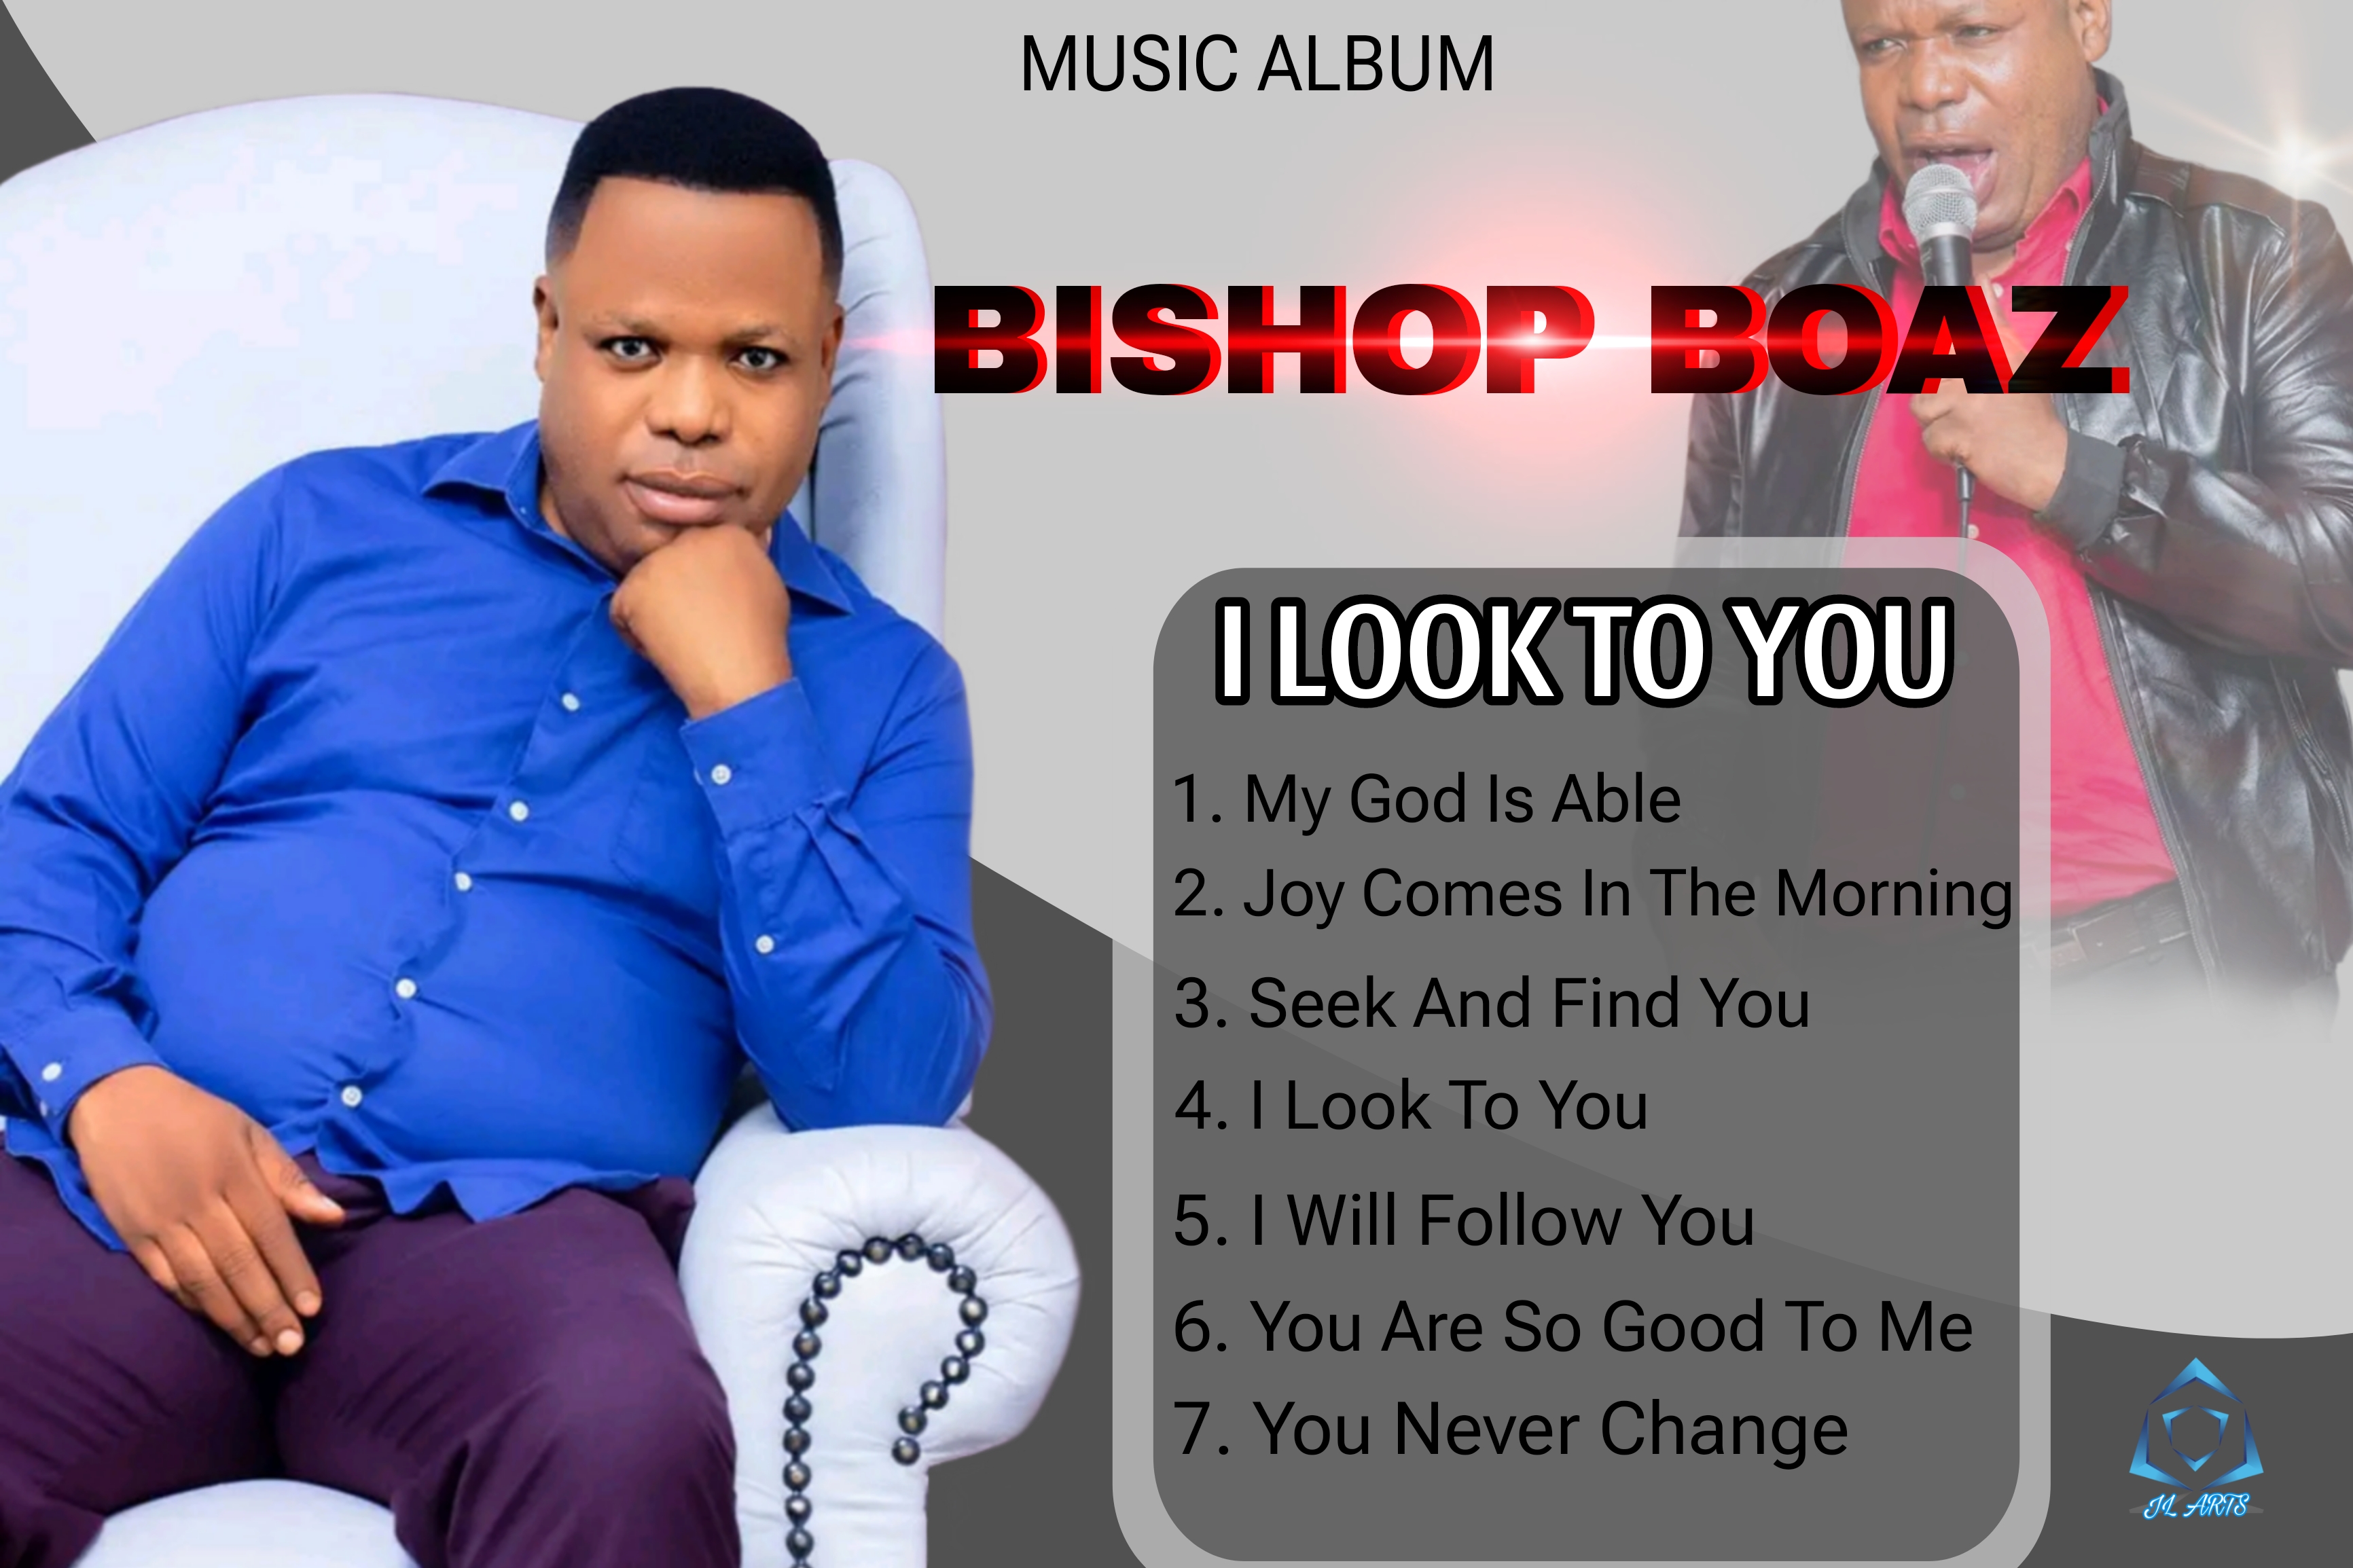 I Look To You - Bishop Boaz